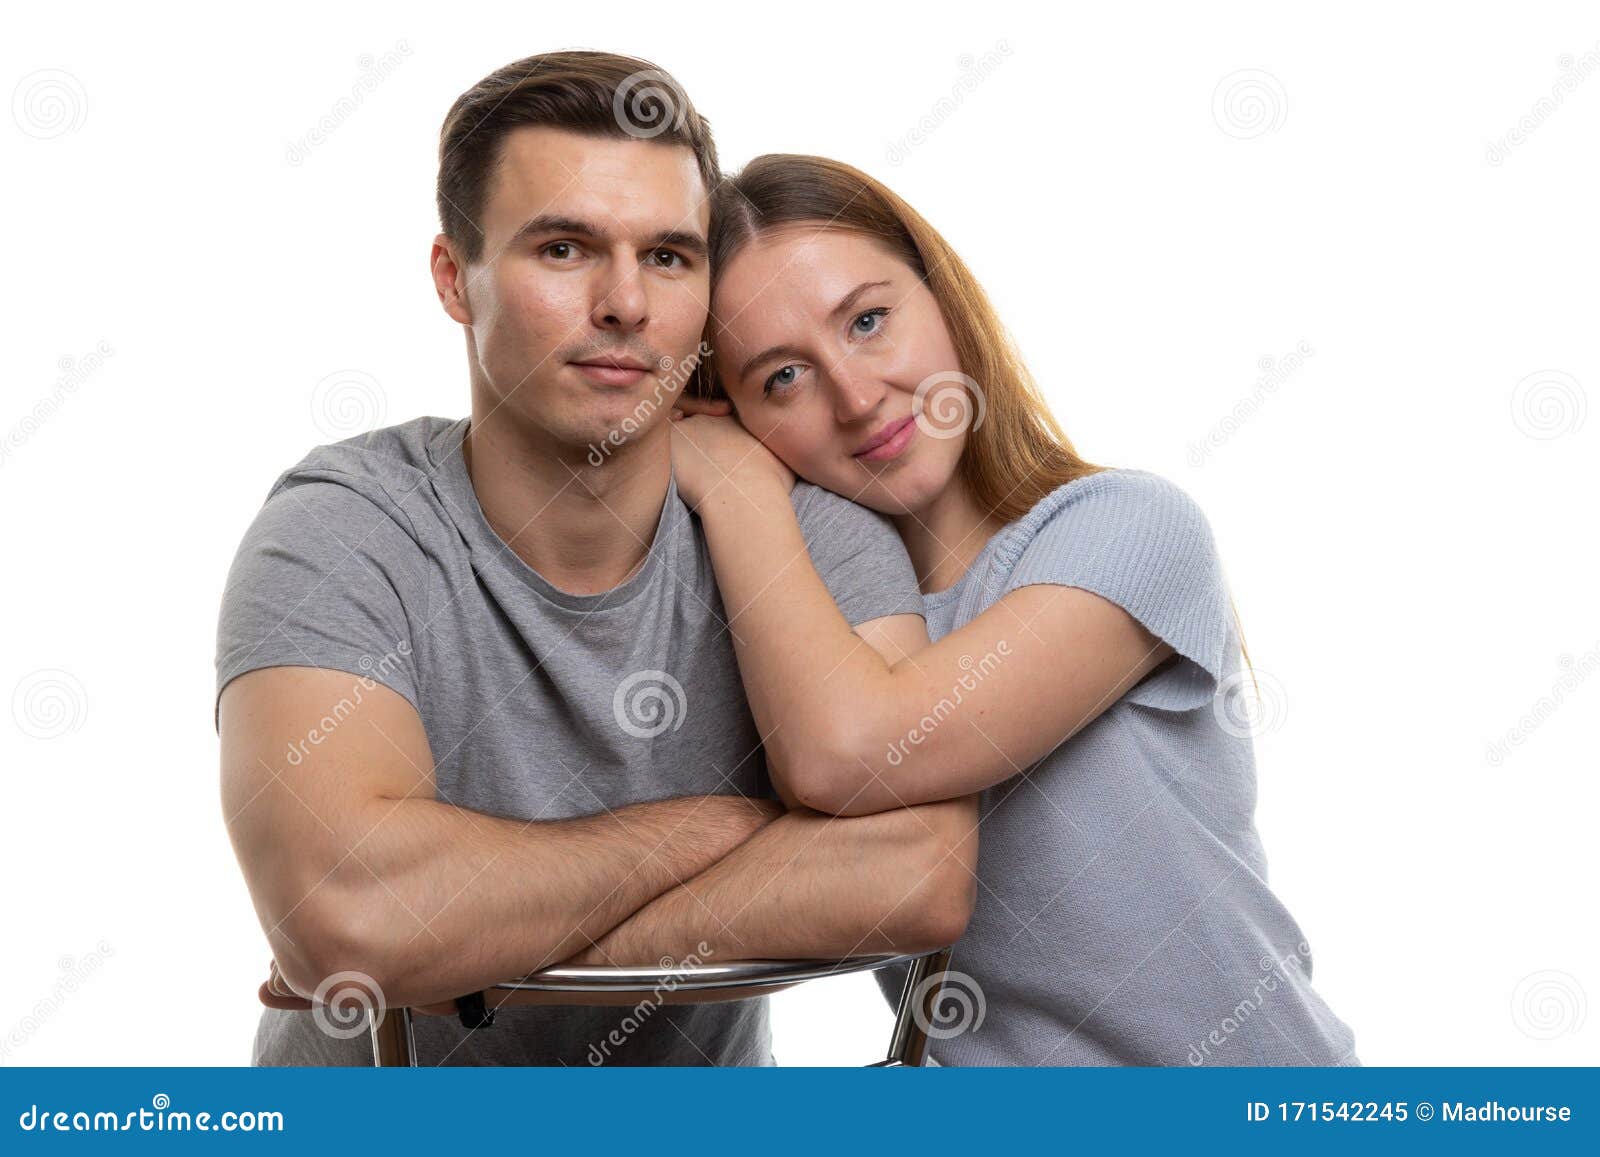 https://thumbs.dreamstime.com/z/portrait-young-couple-europeans-white-background-171542245.jpg